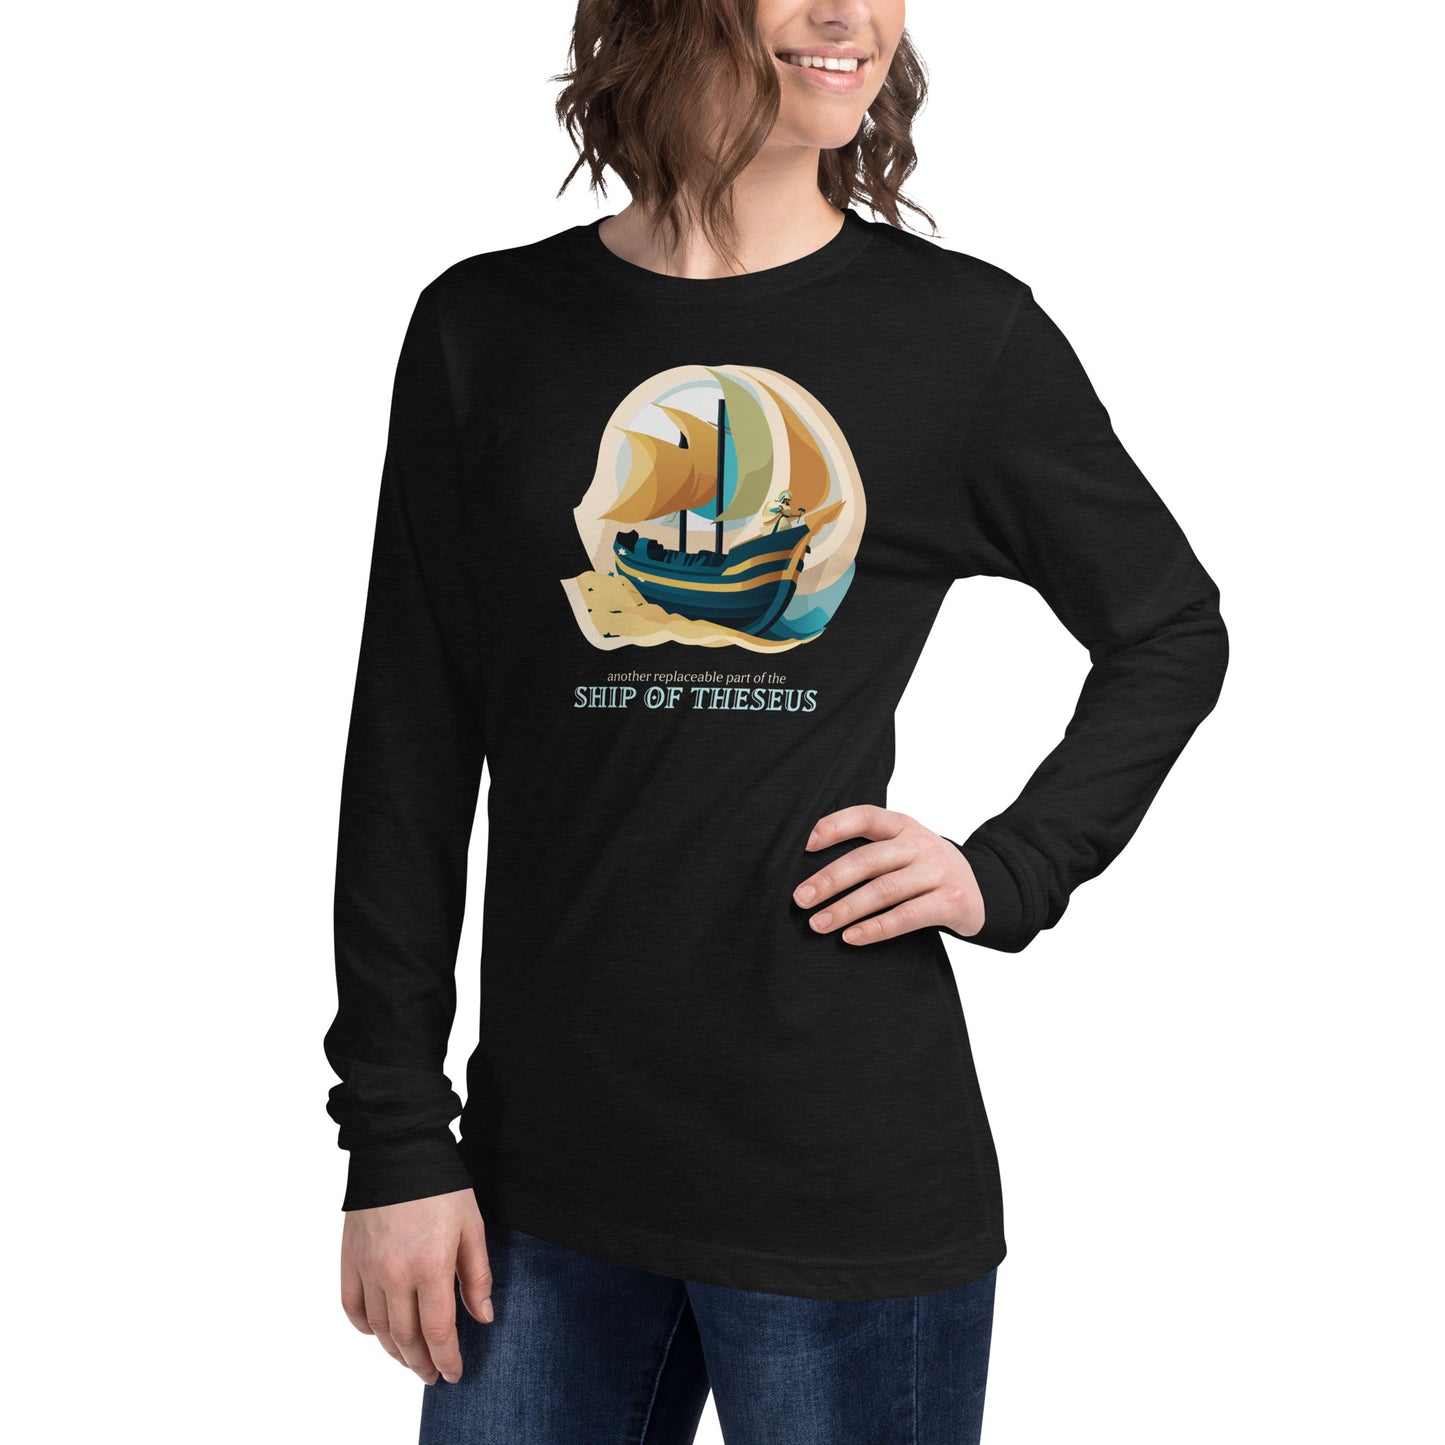 Another Replaceable Part of the Ship of Theseus: Long-Sleeve T-Shirt